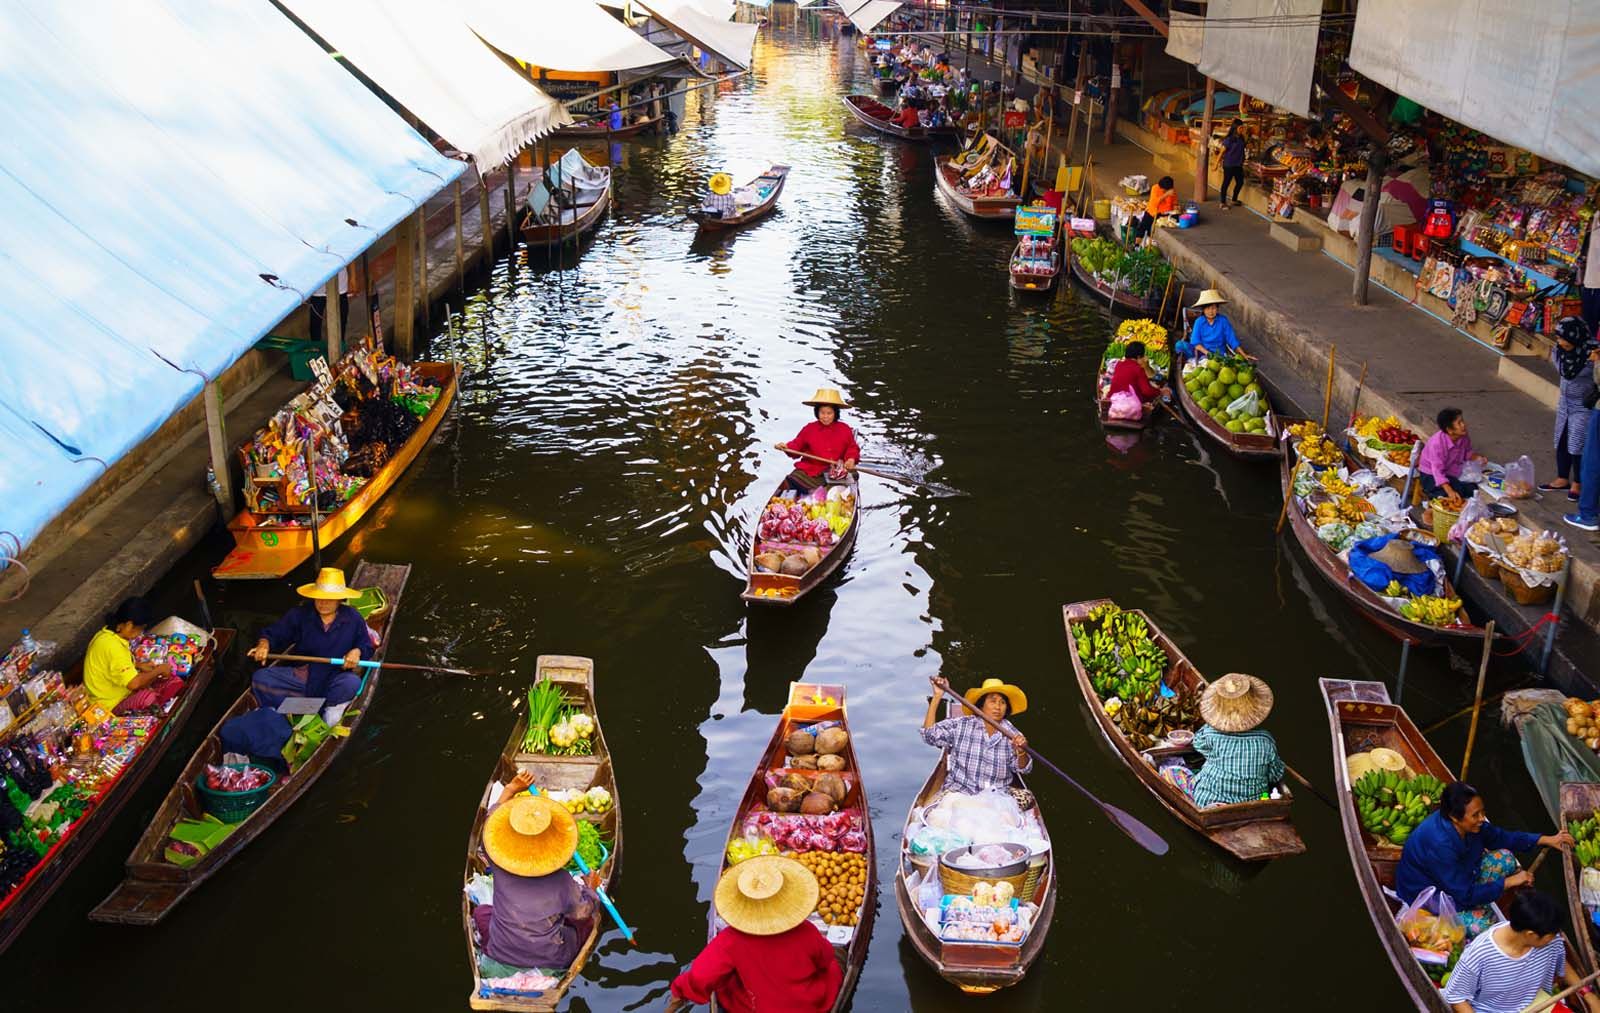 Floating markets are iconic attractions in Bangkok